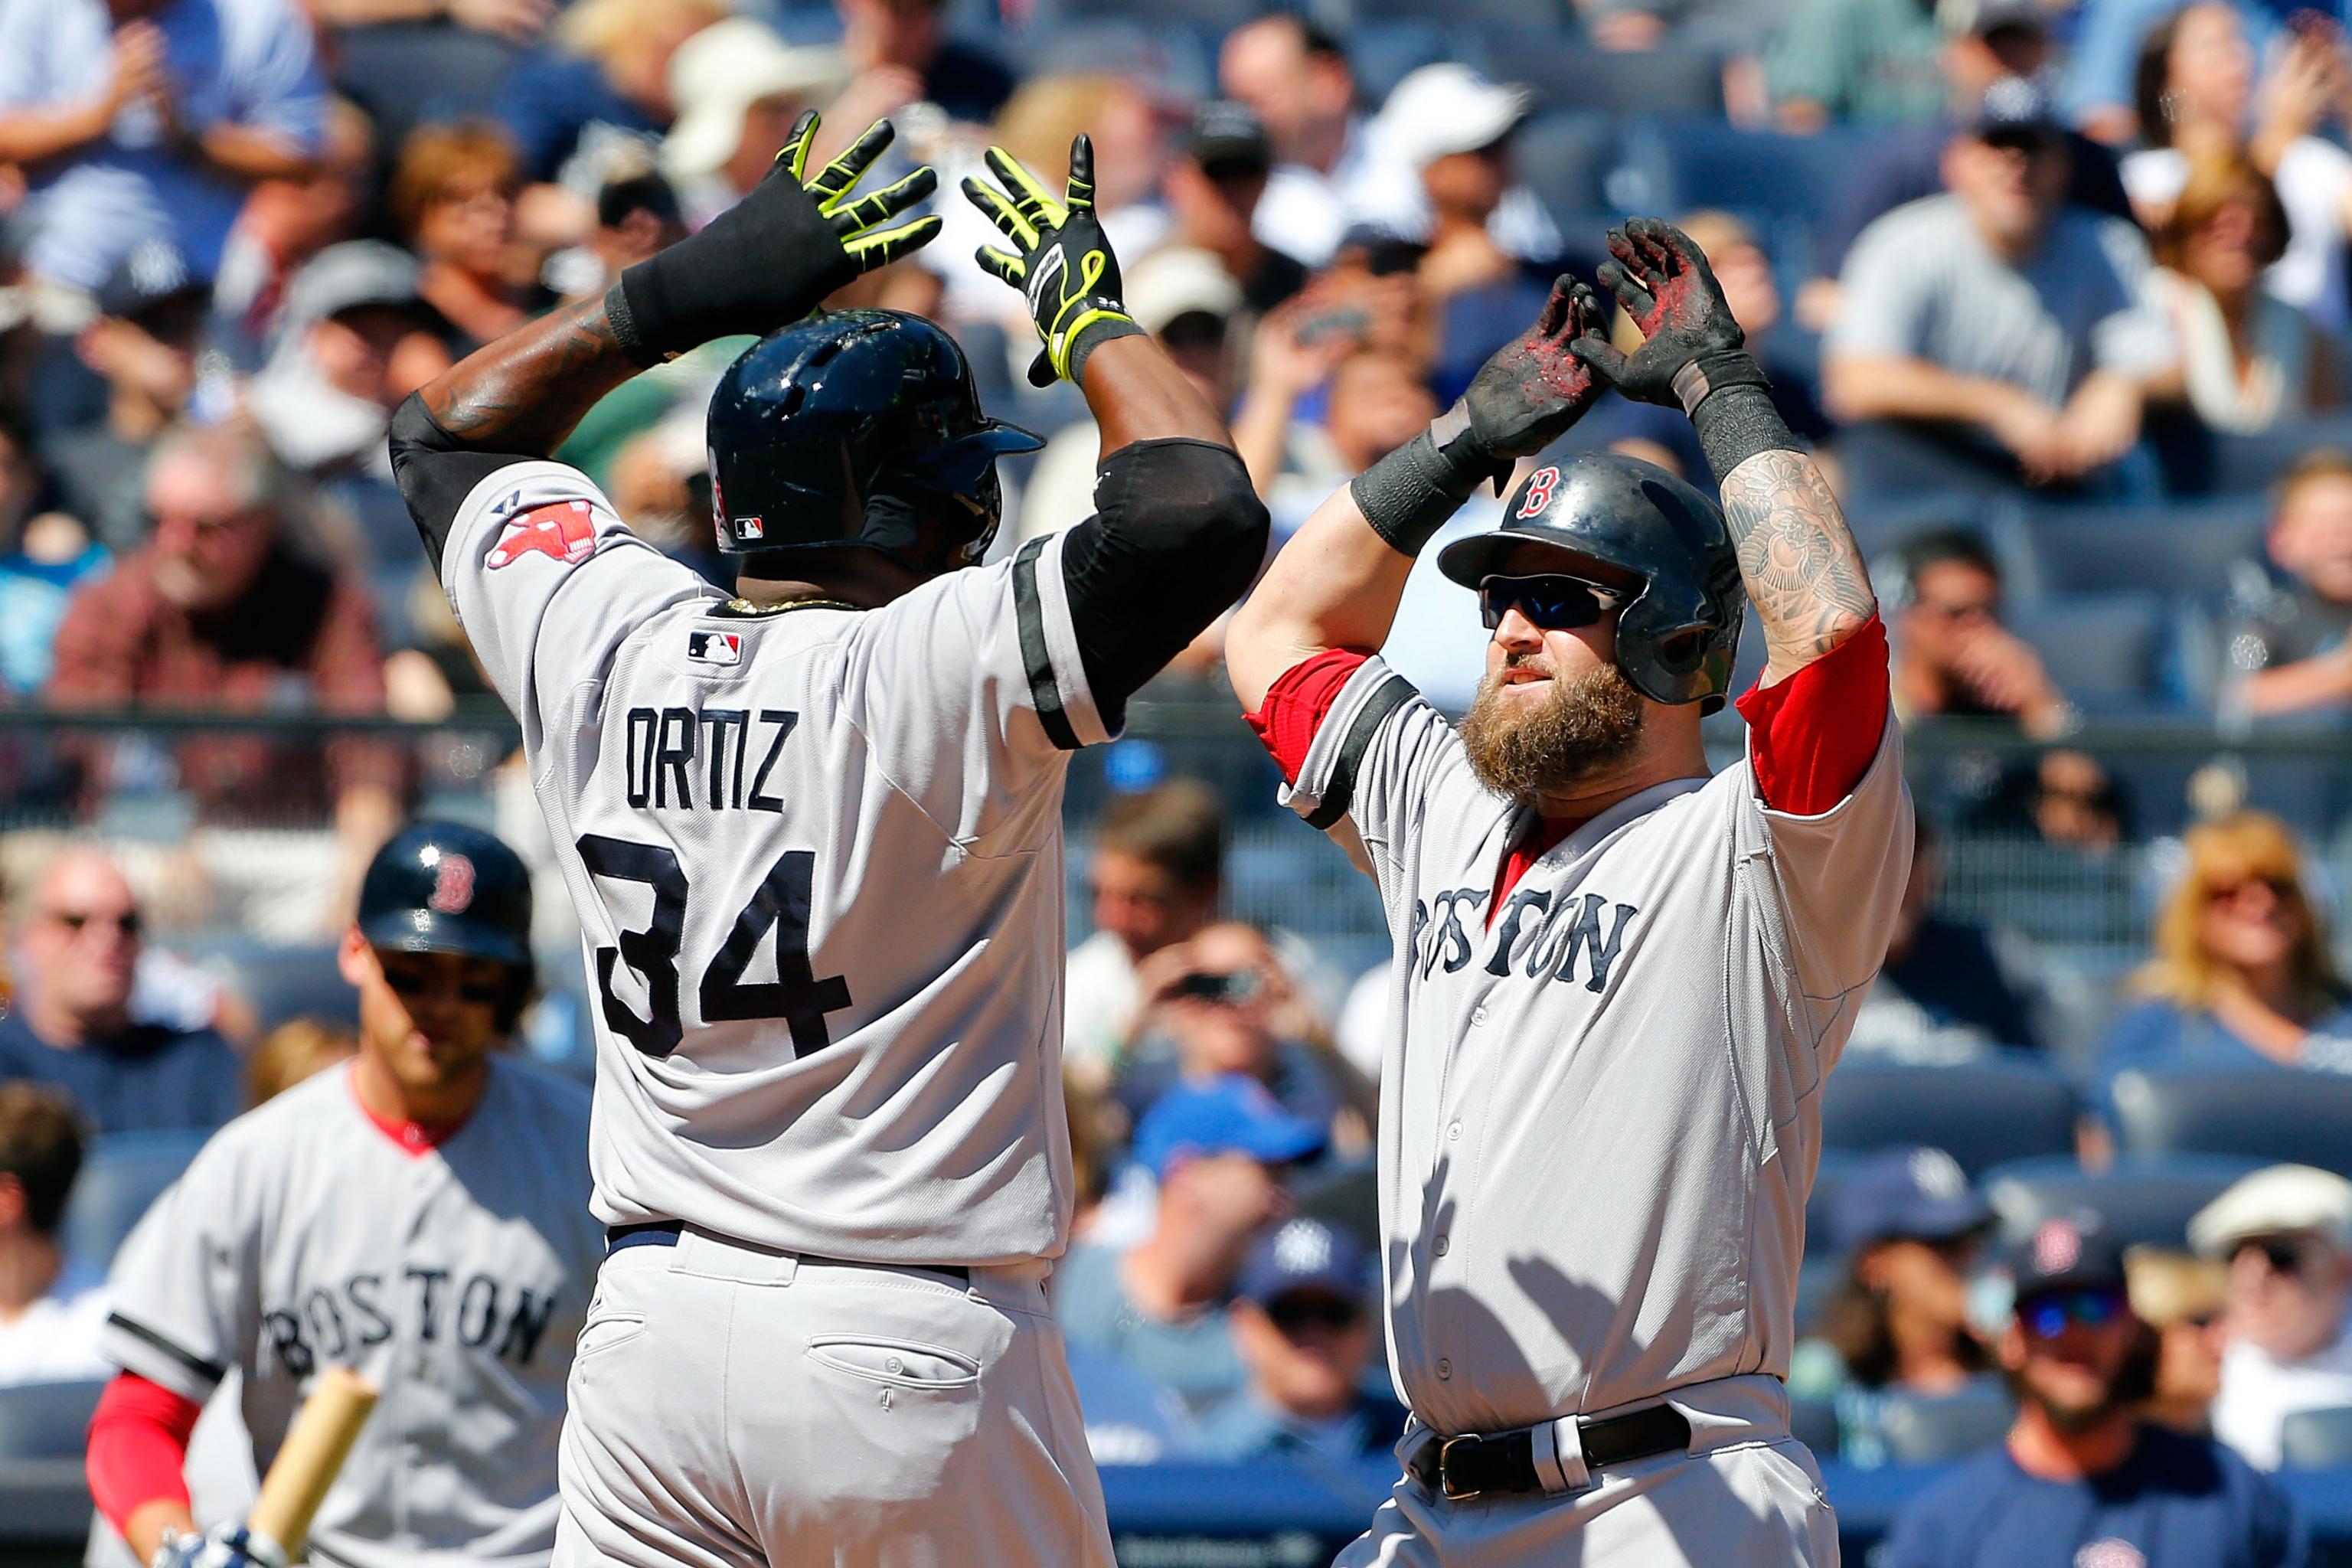 Nick Swisher, Jonny Gomes, bring the electricity to Home Run Derby